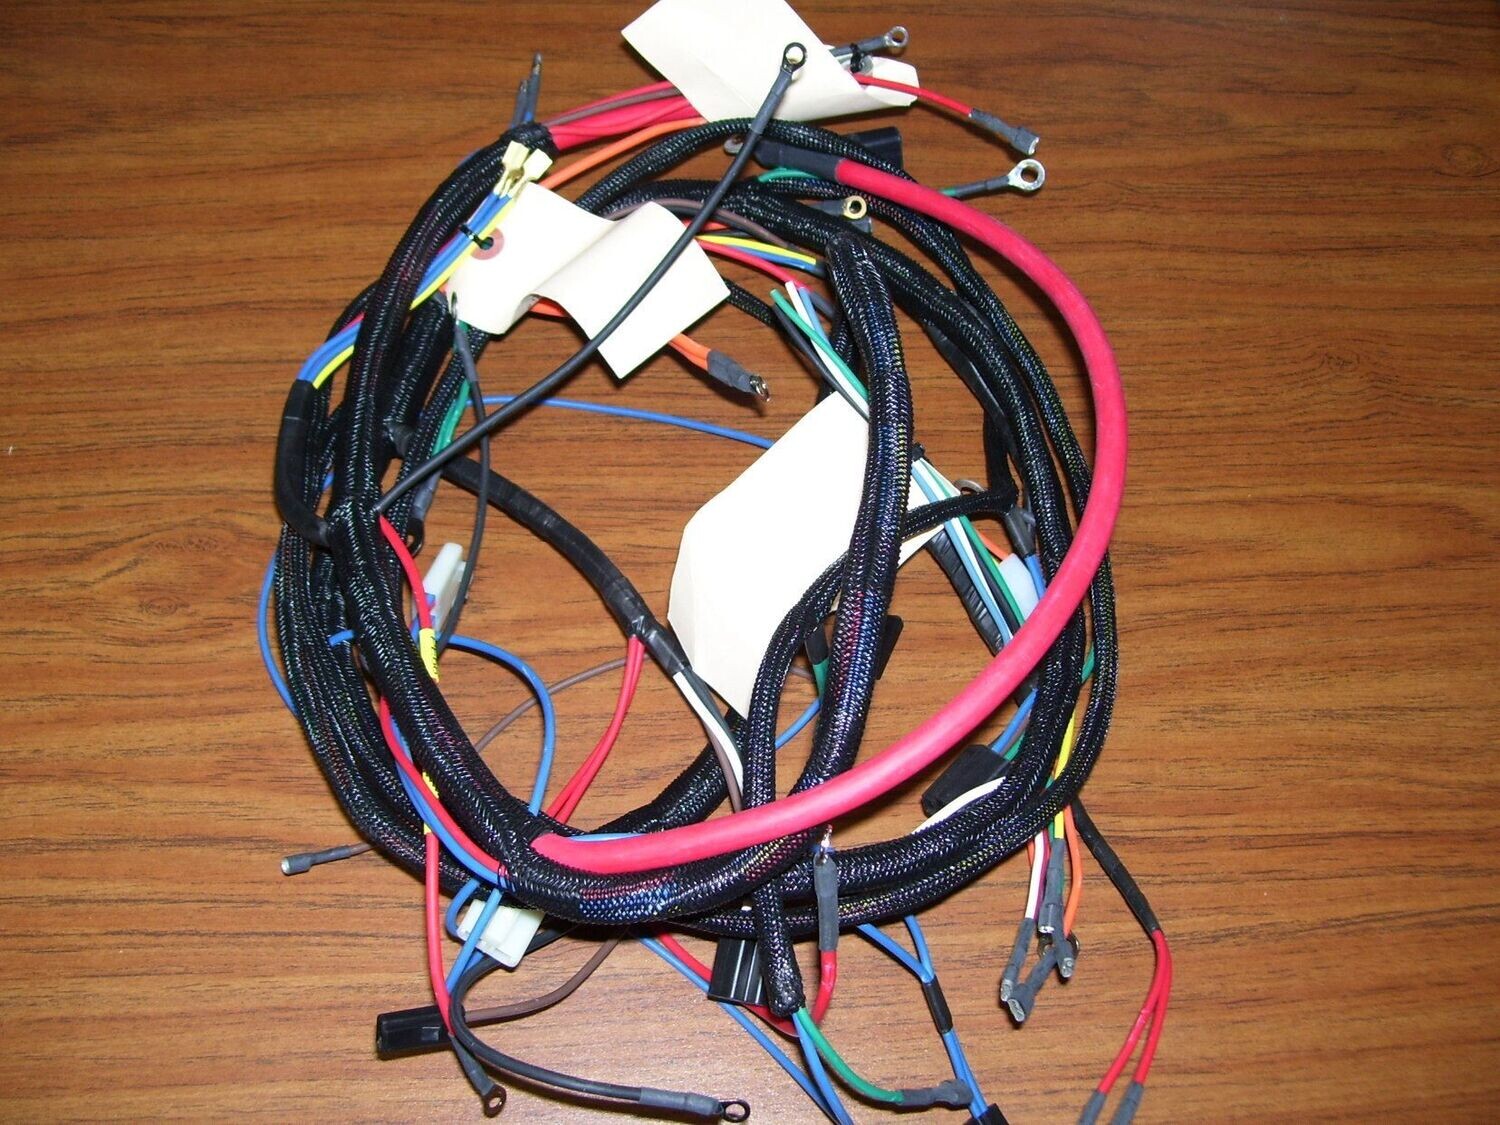 725-3086 - With Battery Cables